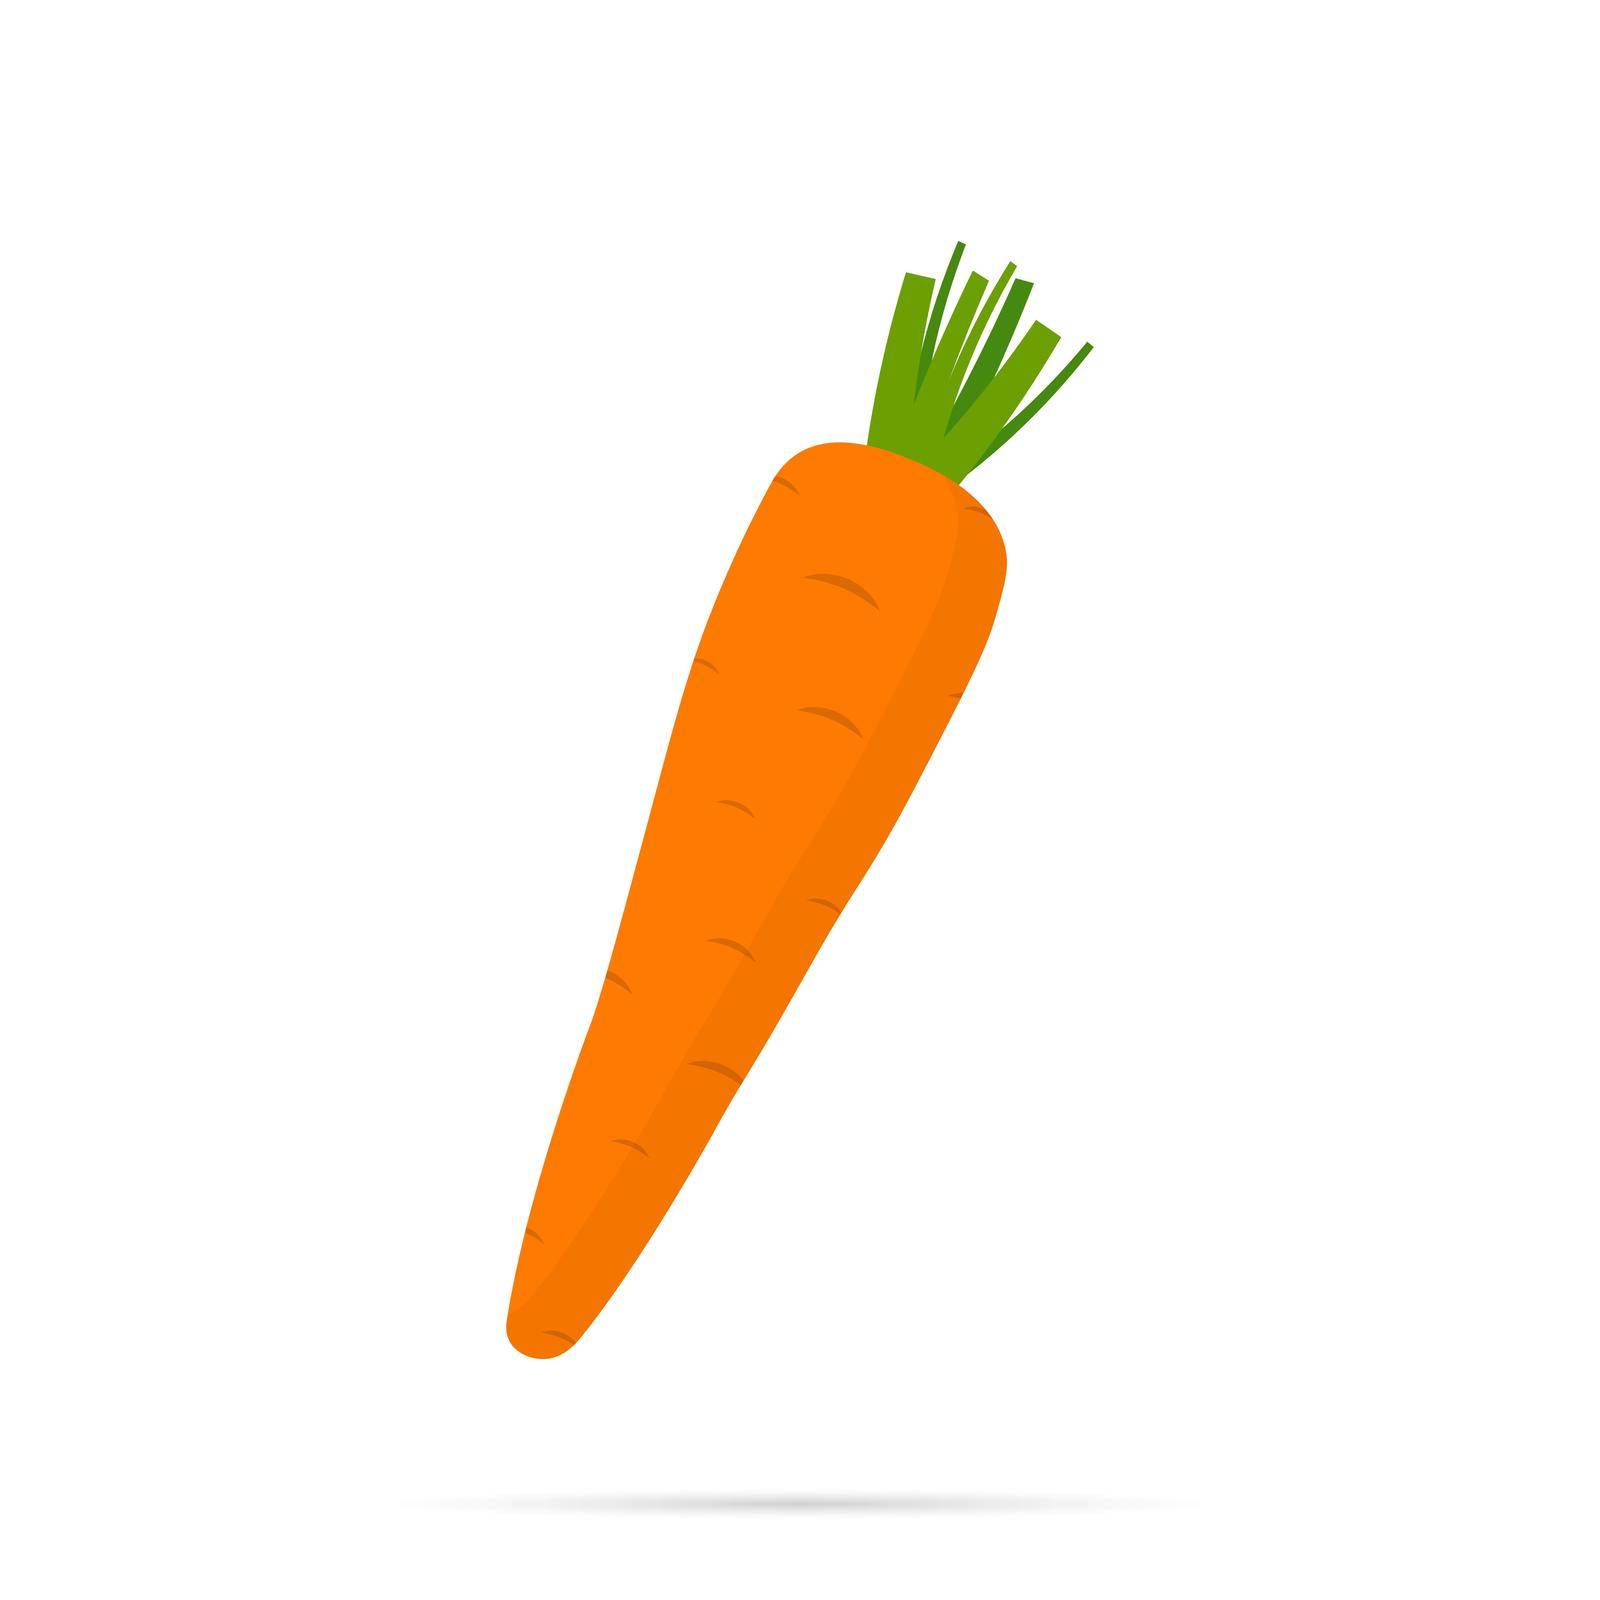 Carrot icon with shadow. Vector icon eps10